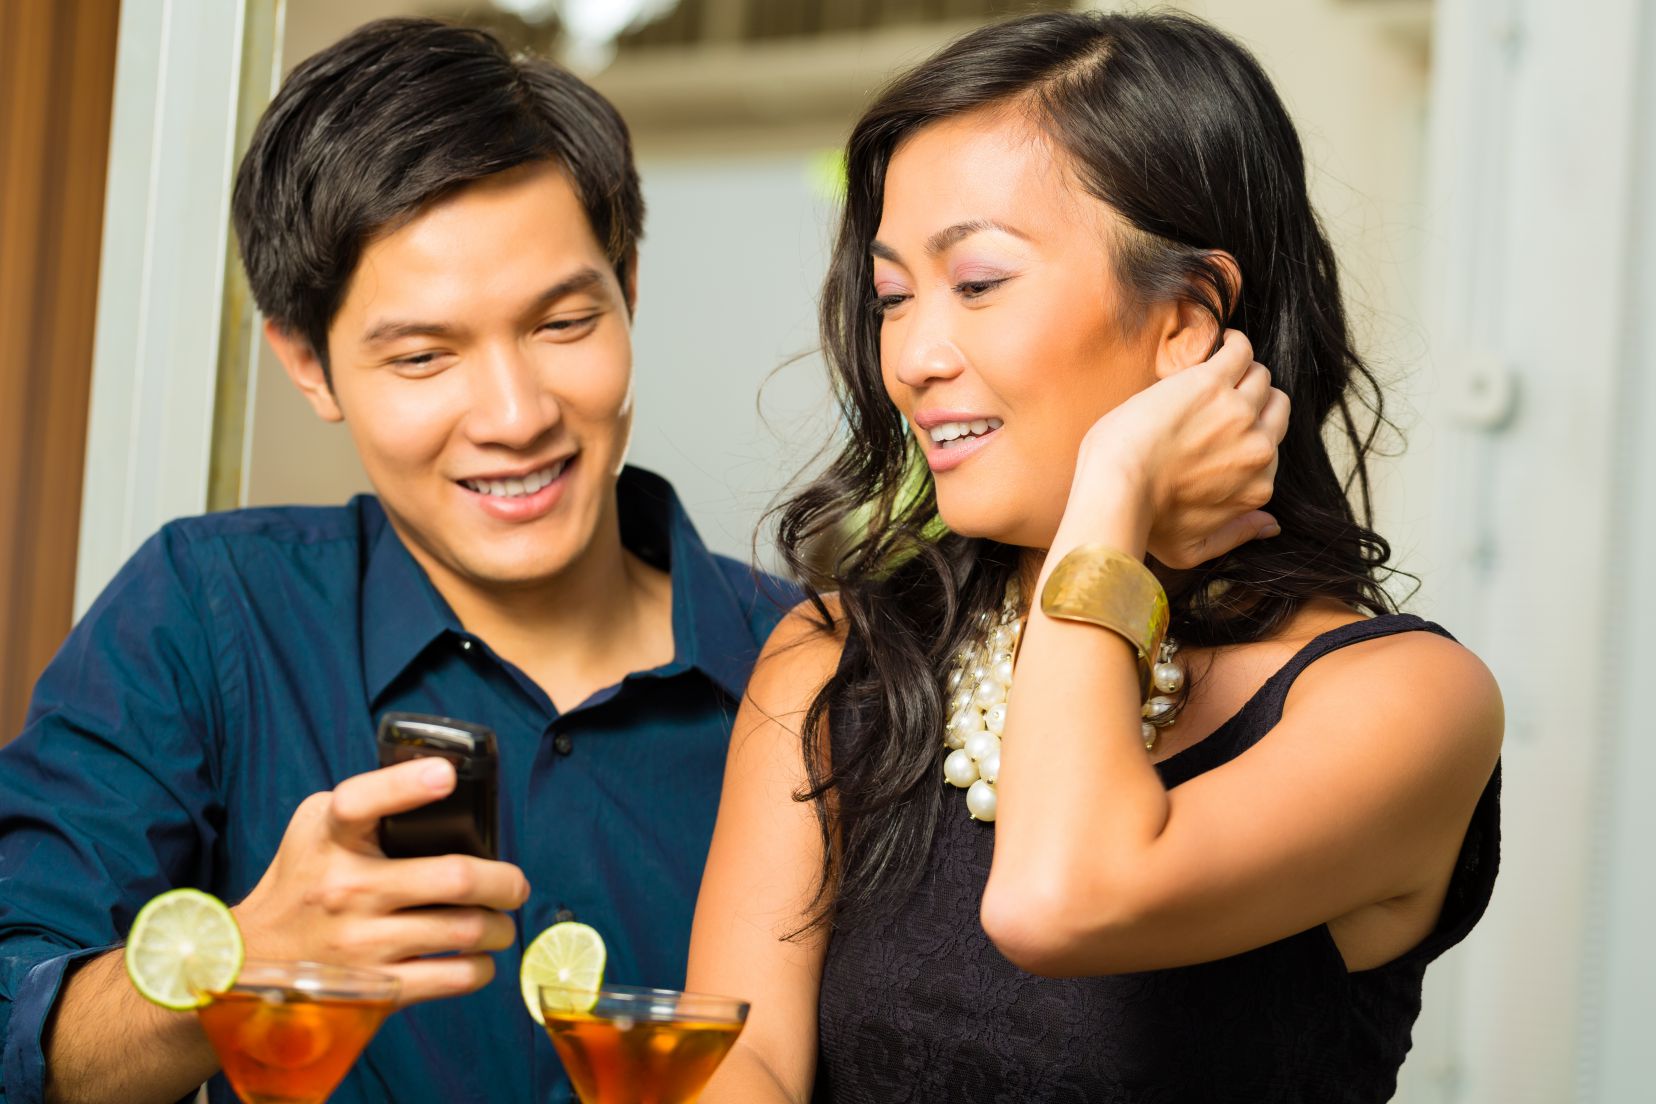 Asian man is flirting with woman in a bar while having drinks, woman is shy